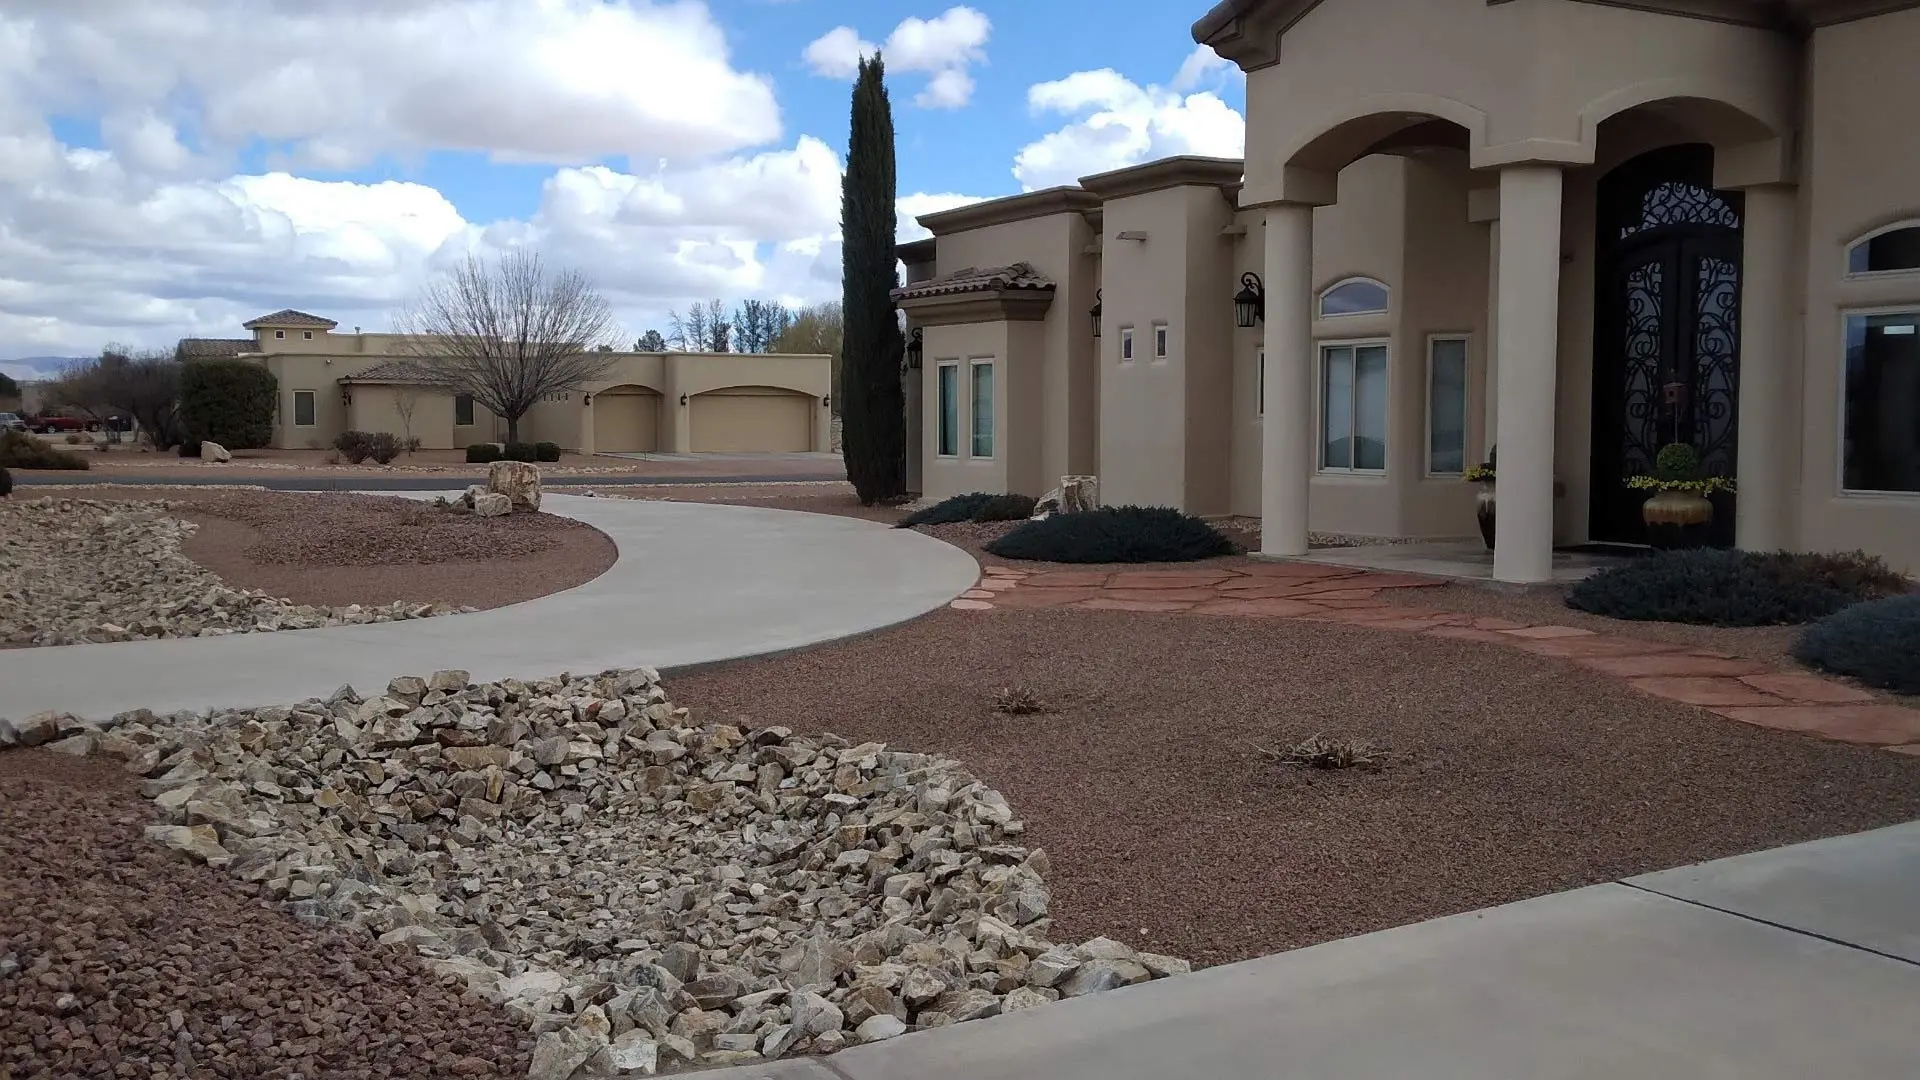 Landscape for a home filled with rock in Las Cruces, NM.